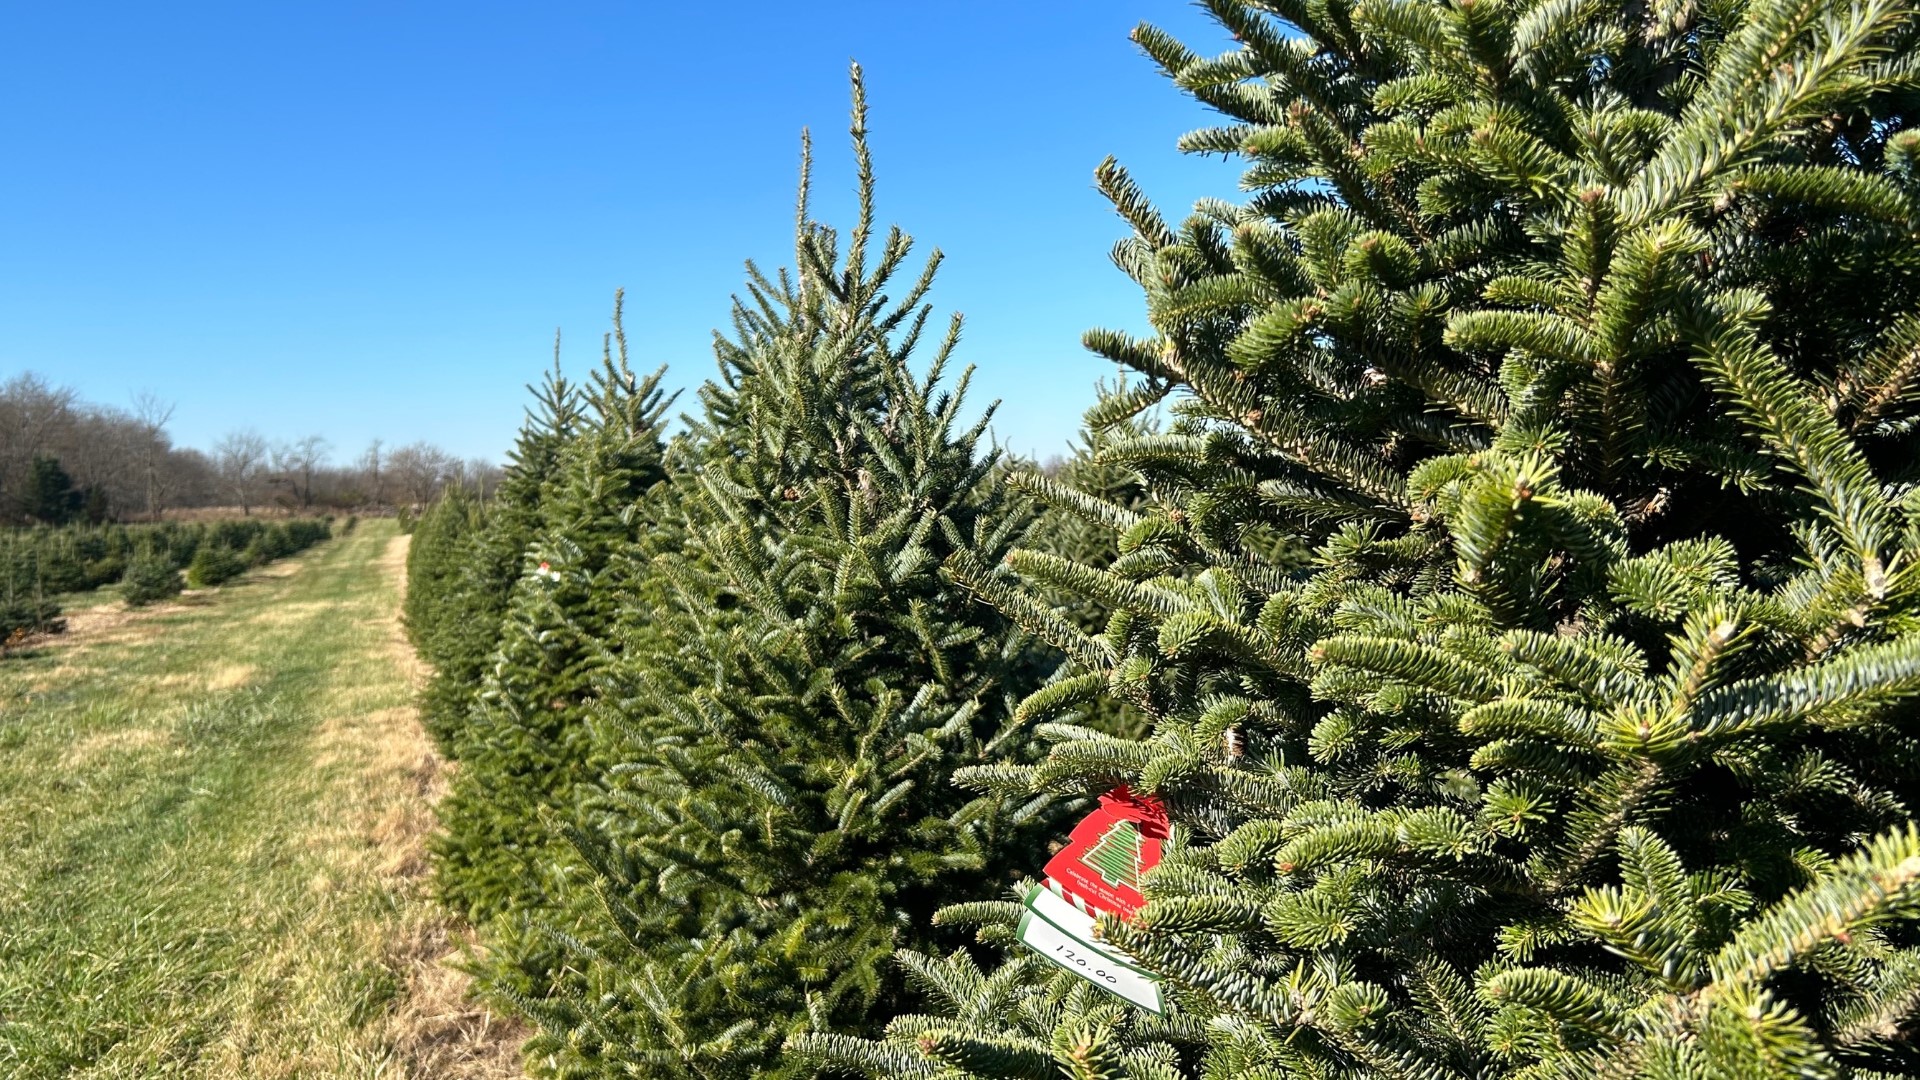 Christmas tree farms aren't immune to inflation, plus a drought 10 years ago has led to limited supply.